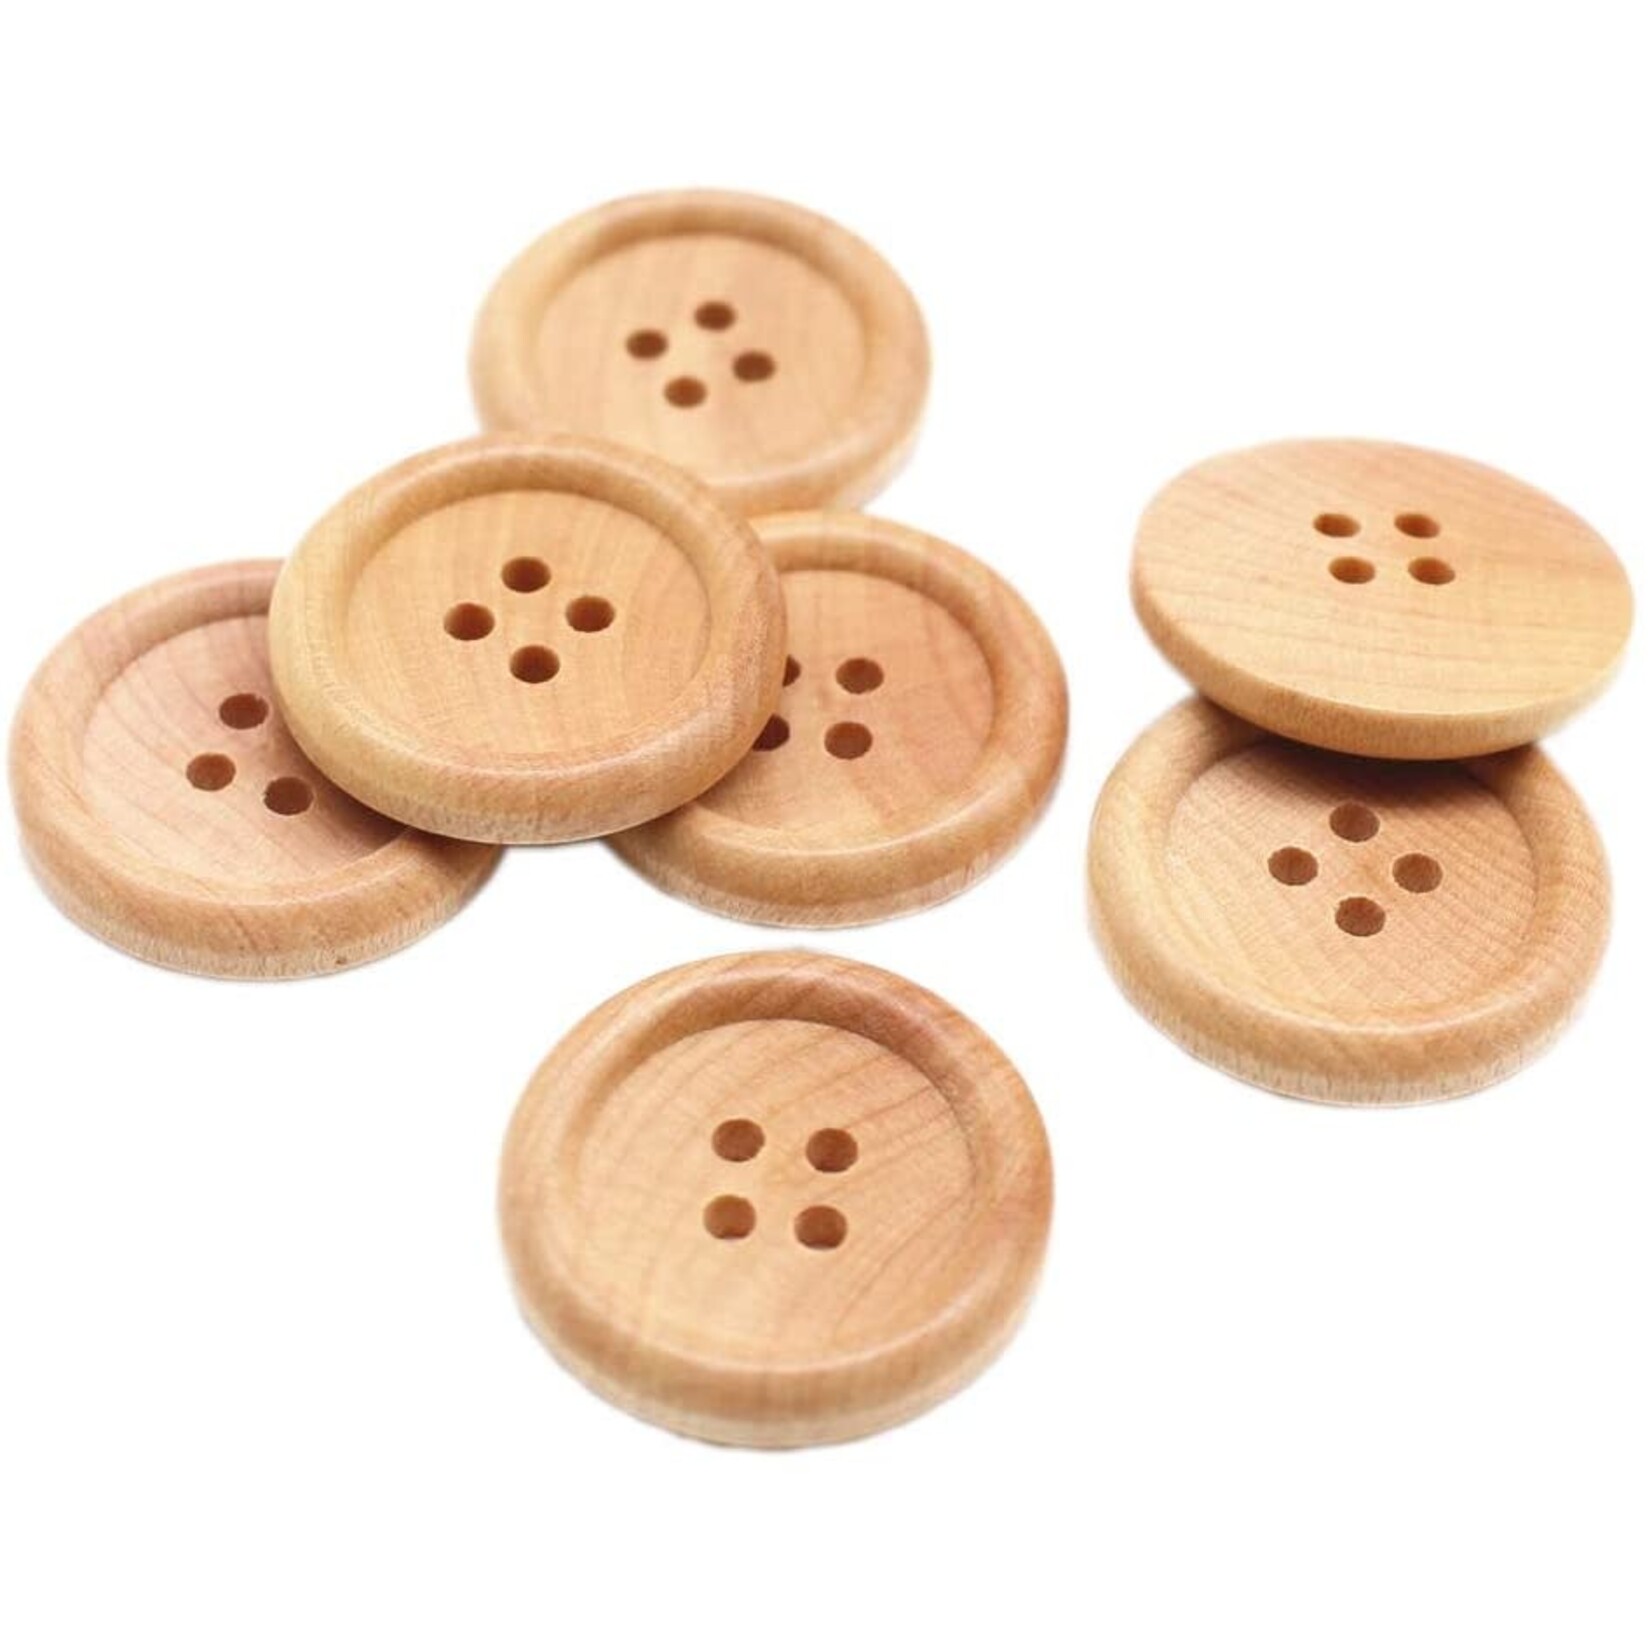 Darice Buttons - Natural Wood - 30mm - 6 Pieces